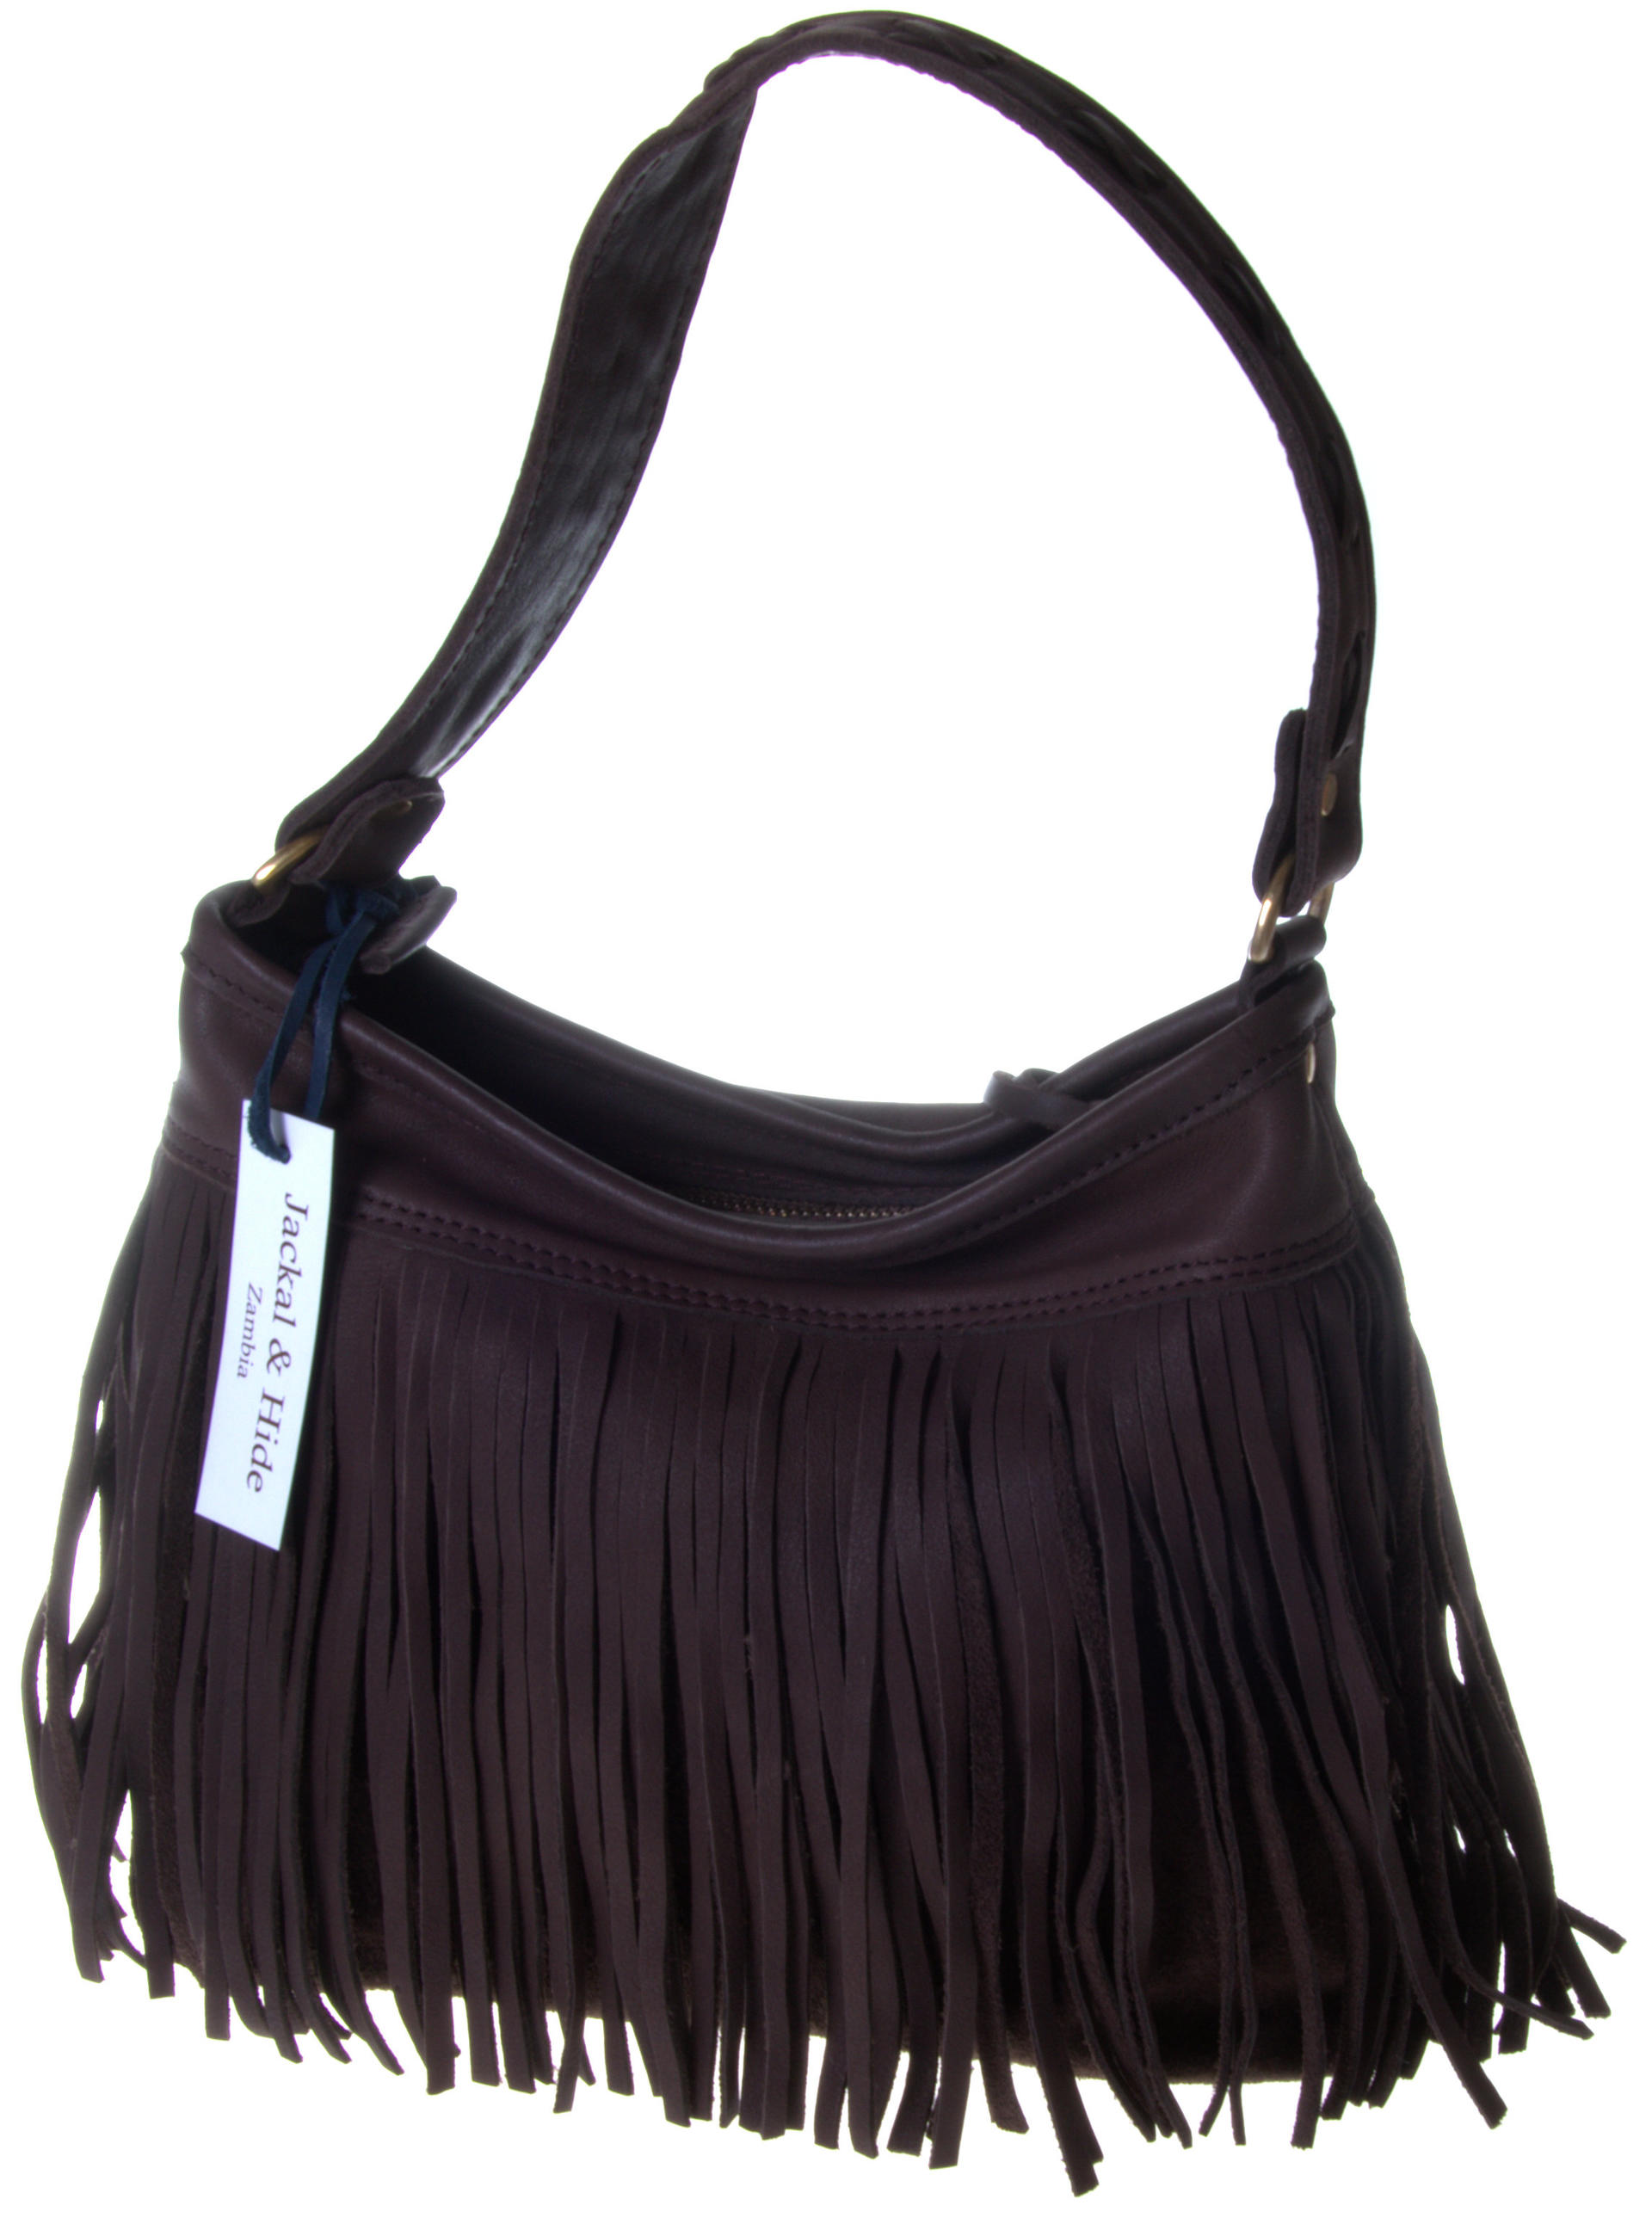 PONCHO - Genuine Cow Leather Bag with a Trendy Fringe from Zambia | Gundara